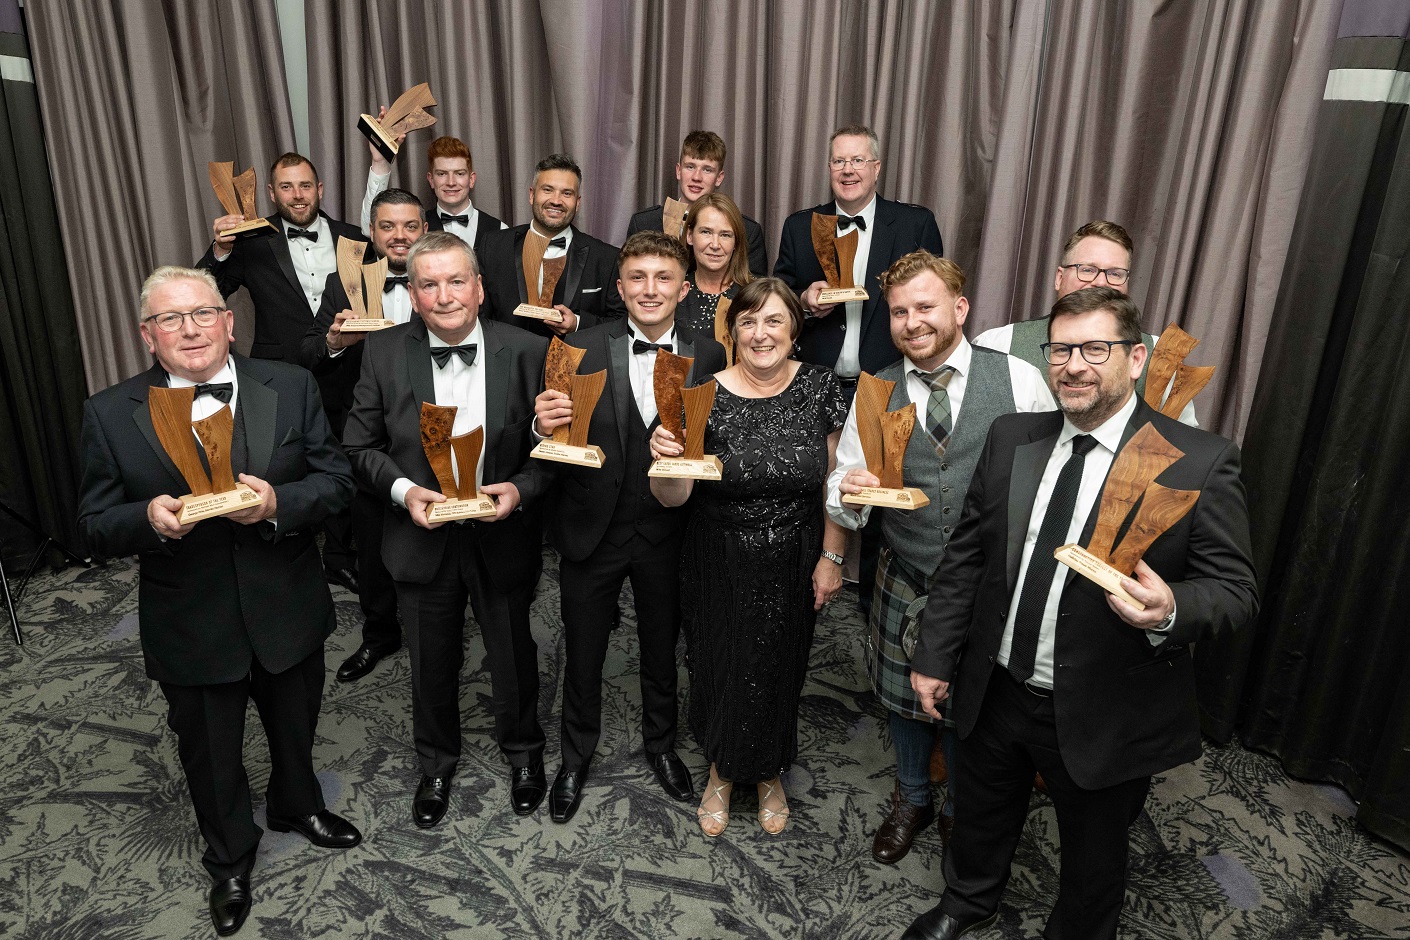 Construction industry in north east celebrated at annual Trades Awards